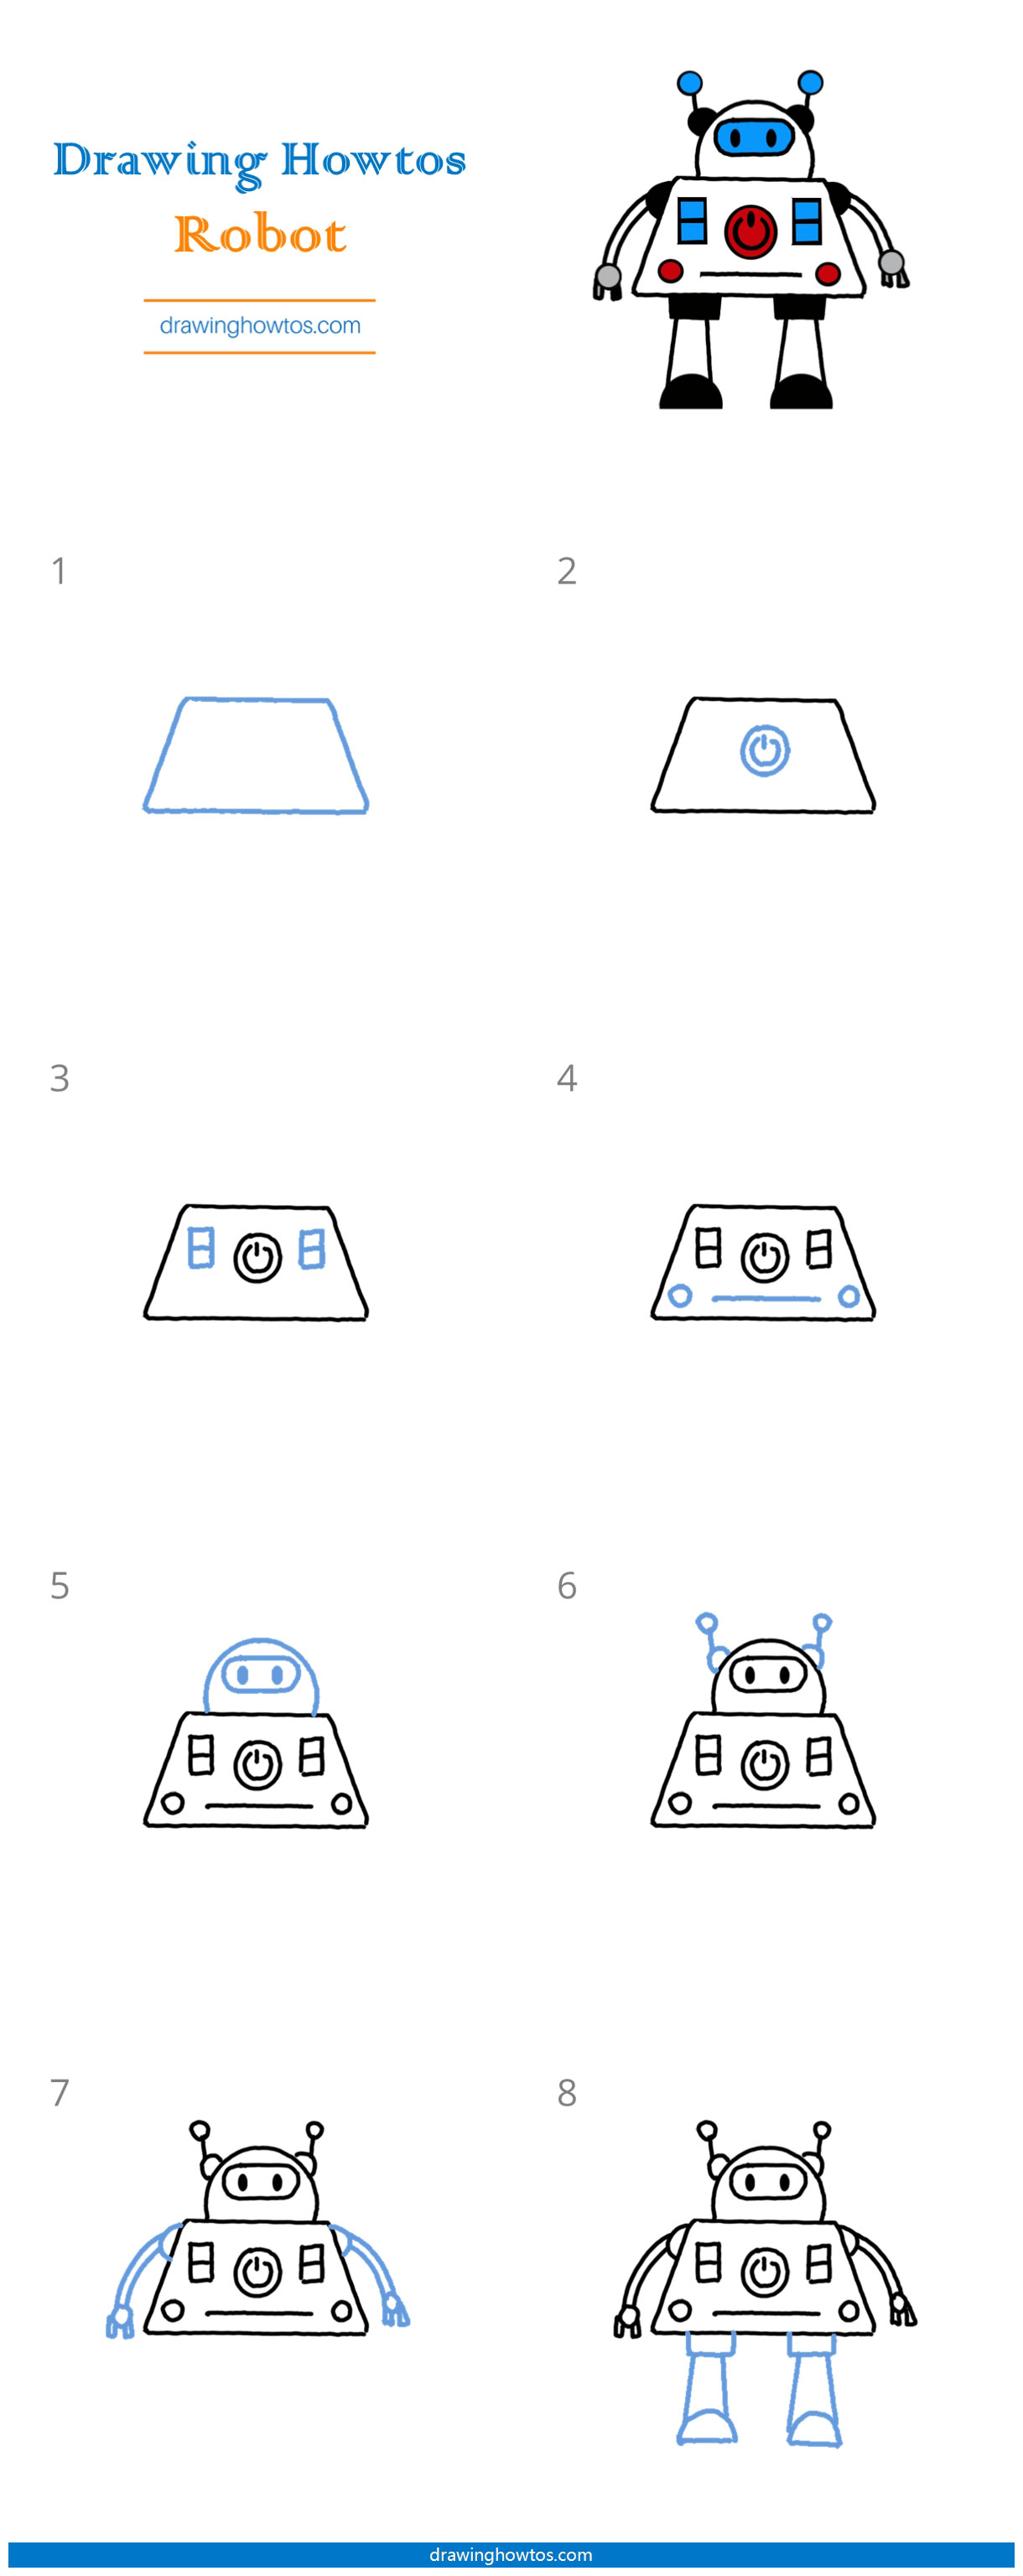 How to Draw a Robot Step by Step